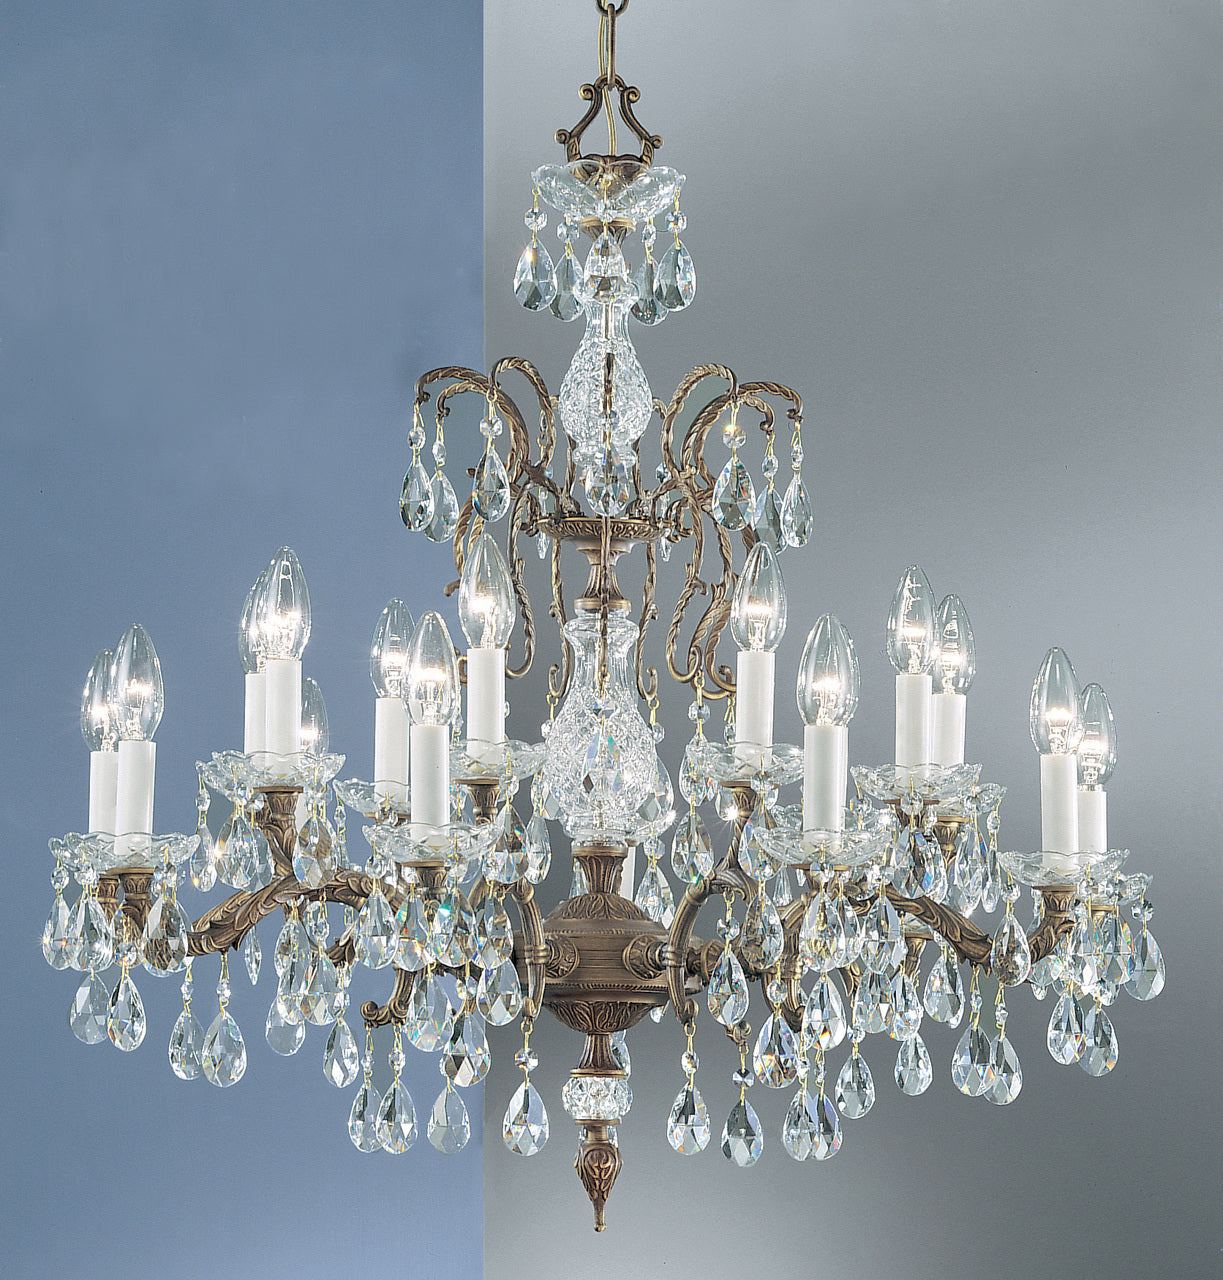 Classic Lighting 5538 RB SC Madrid Crystal/Cast Brass Chandelier in Roman Bronze (Imported from Spain)